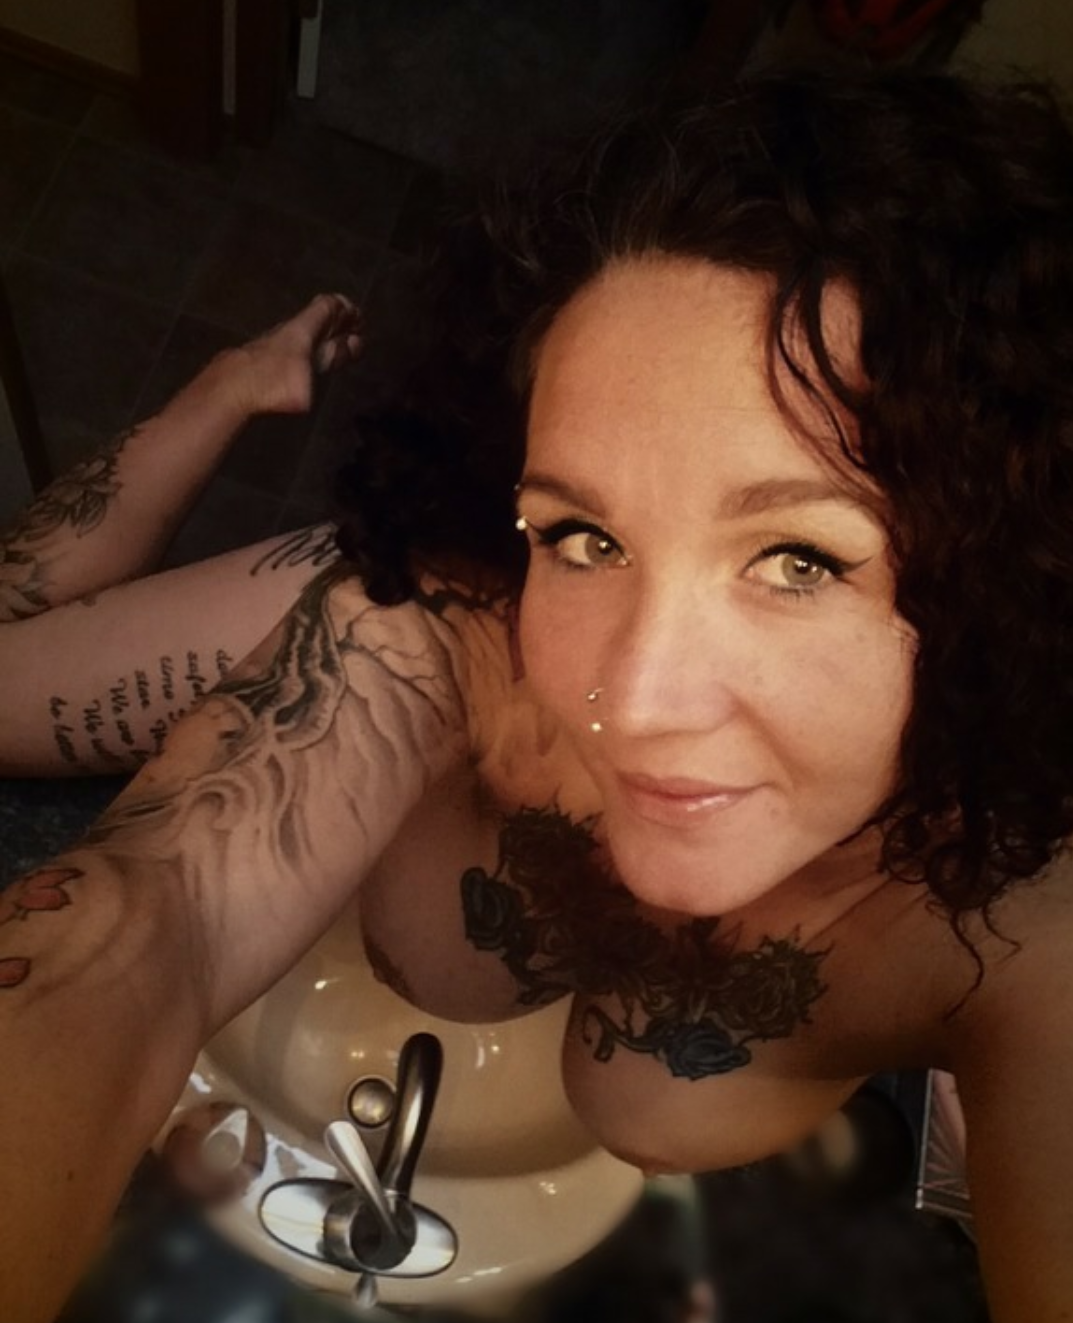 Photo by MsRae with the username @MsRae, posted on August 1, 2019. The post is about the topic Amateurs and the text says 'Hi darlings'